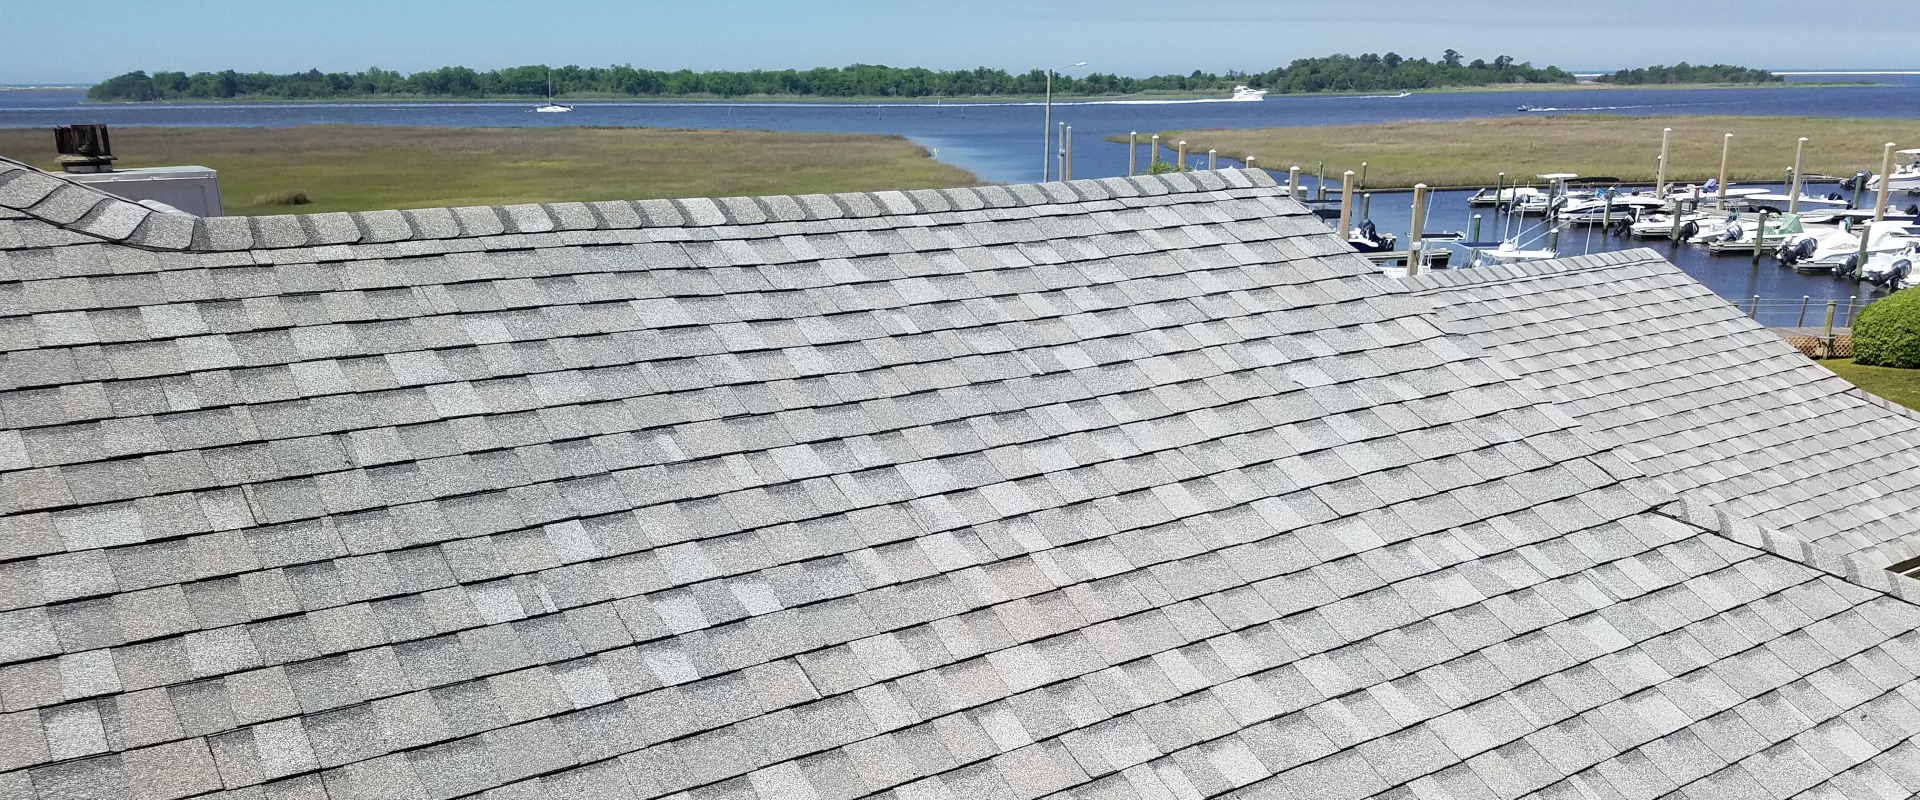 Finding the Right Roofing Company in Wilmington NC